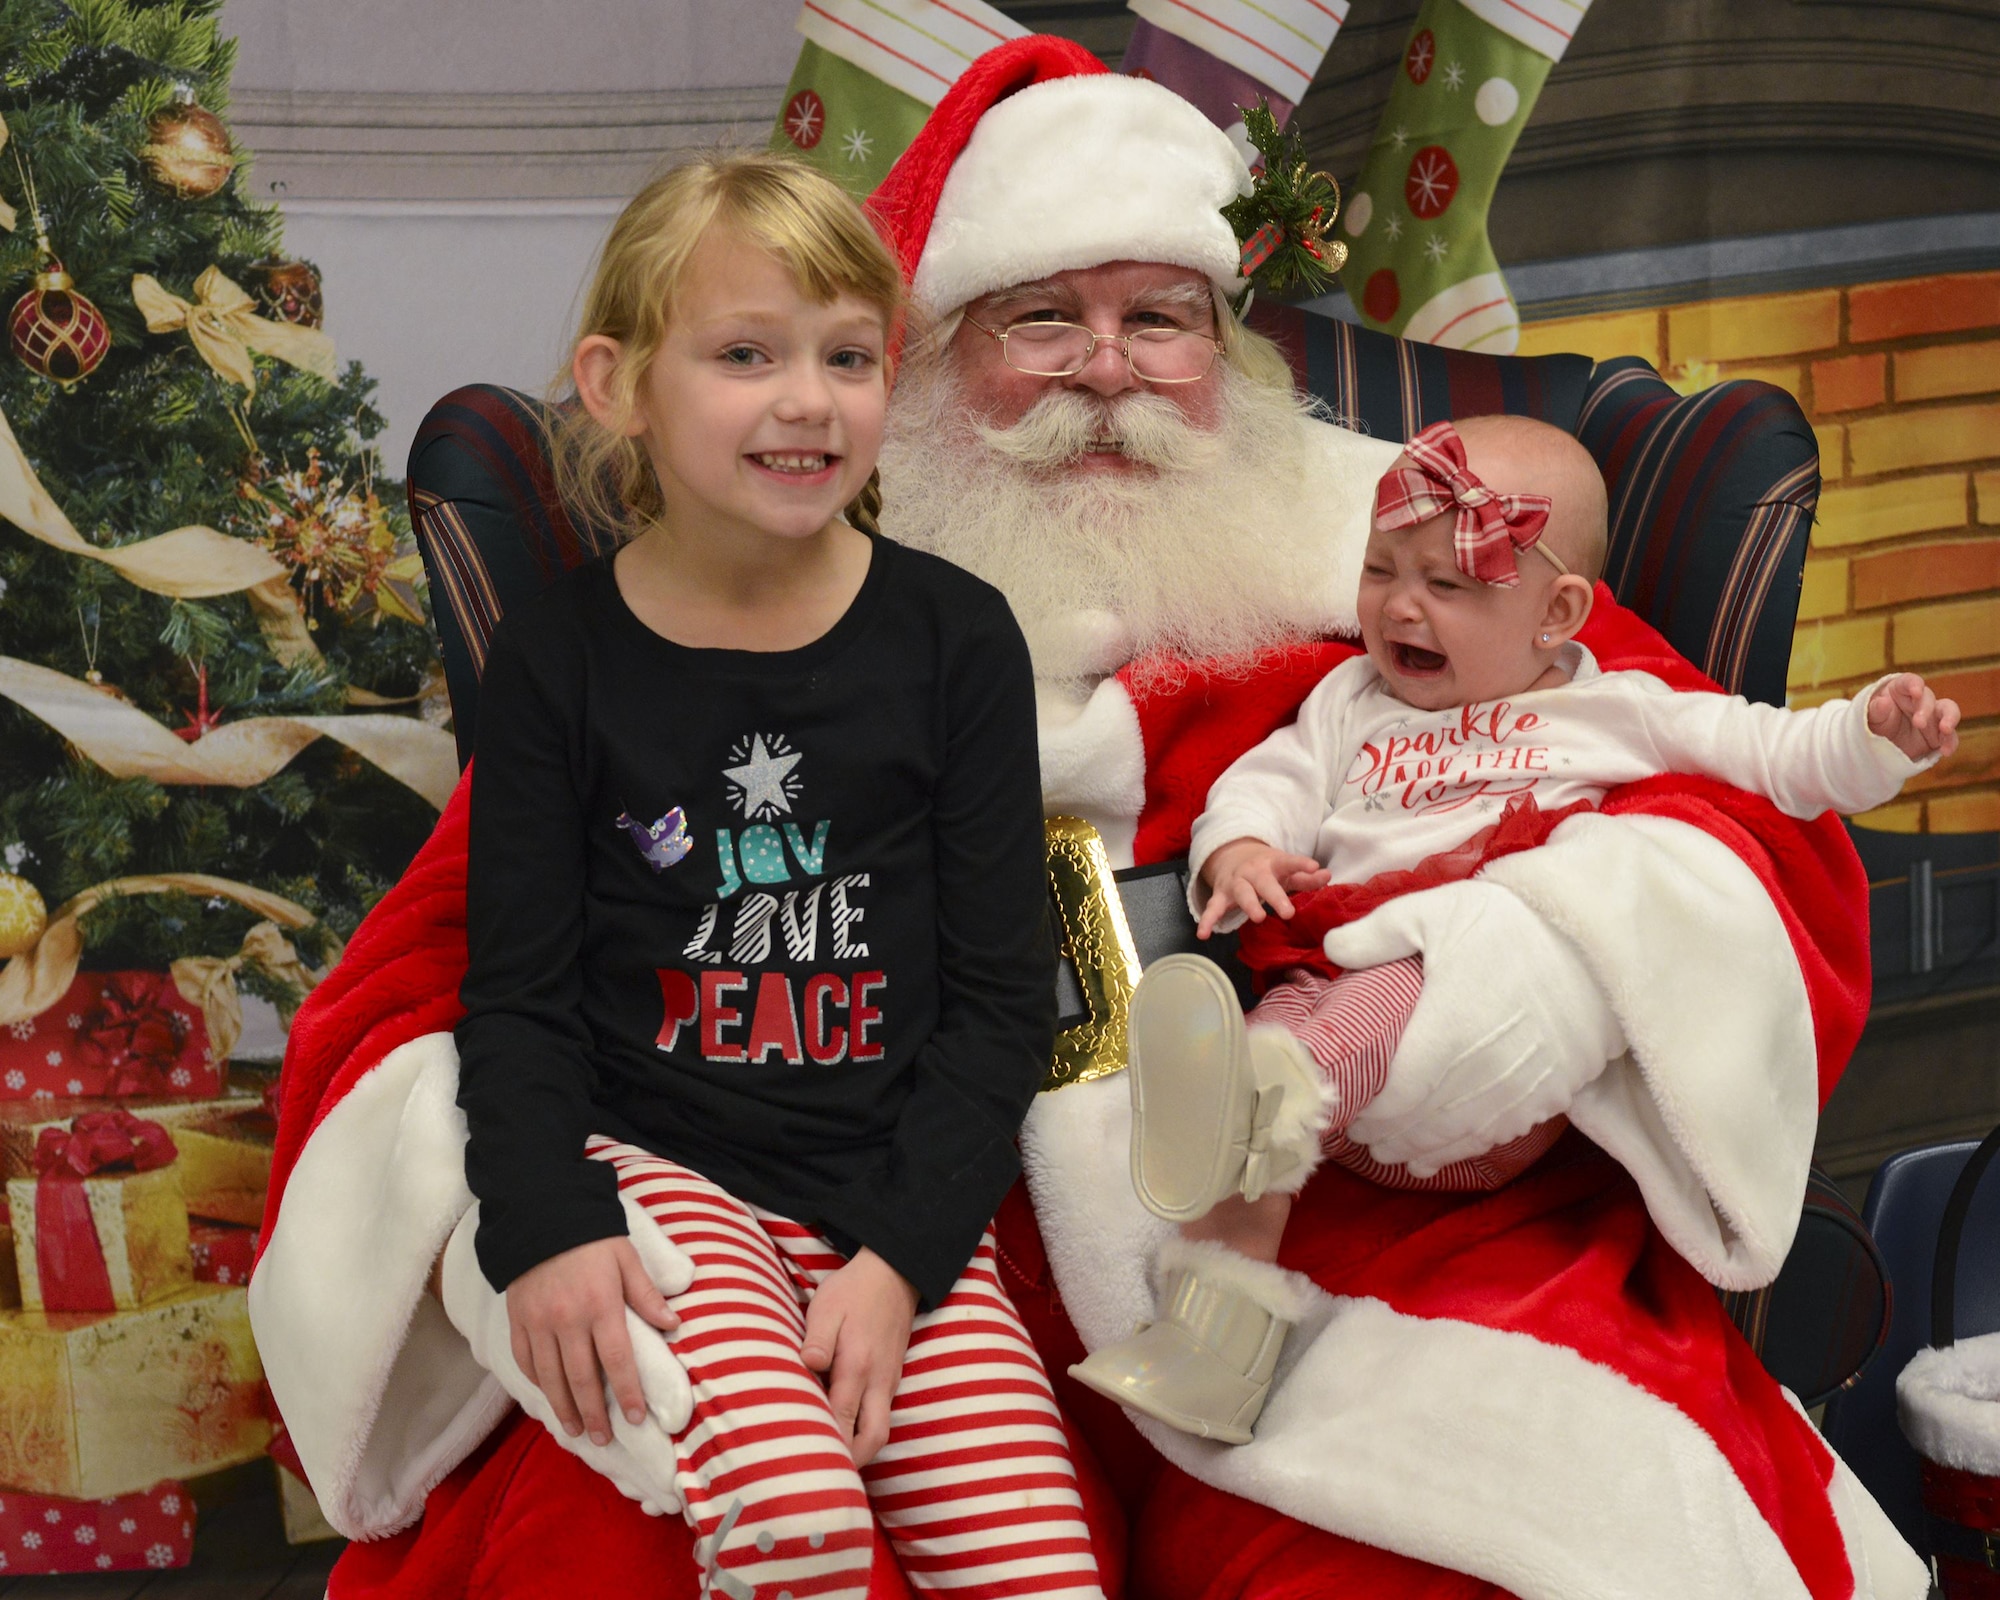 Reagan and Meredith, daughters of Senior Airman Michael Verheyden, 74th Aircraft Maintenance Unit crew chief, pose for a photo with Santa during a holiday party, Dec. 15, 2017, at Moody Air Force Base, Ga. The Airman and Family Readiness Center hosted the event for families of deployed or remote-tour Airmen, and families enrolled in the Exceptional Family Member Program. During the party, families enjoyed a turkey dinner, played games, made arts and crafts for their loved ones and shared a special moment with Santa Claus. (U.S. Air Force photo by Senior Airman Lauren M. Sprunk)